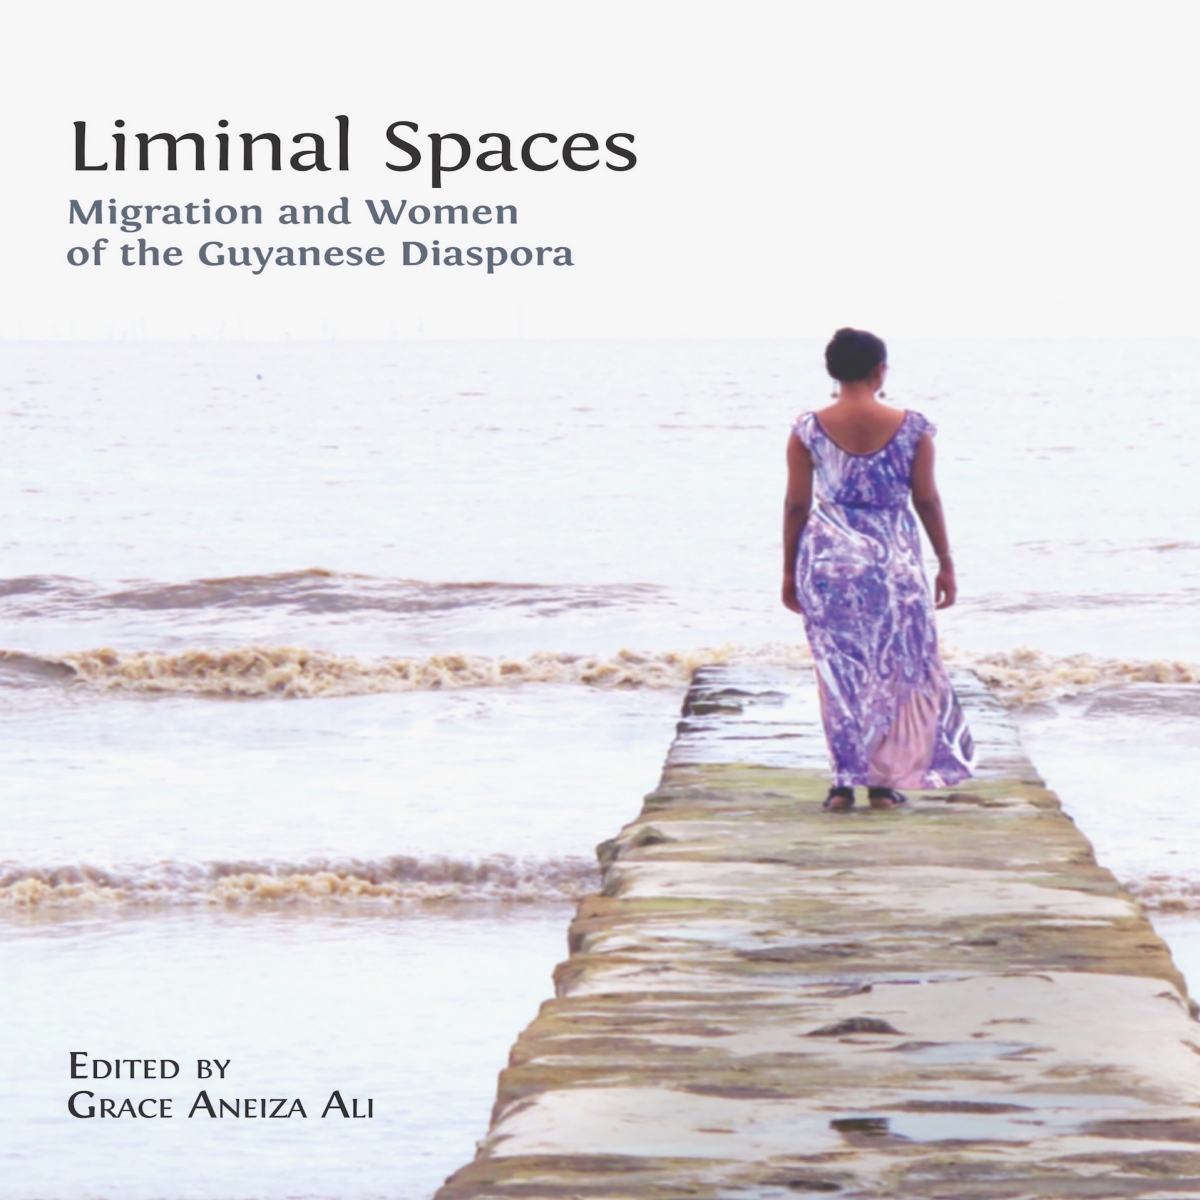 Liminal Spaces books cover shows figure of a woman from behind wearing a purple dress walking out onto a path into the ocean